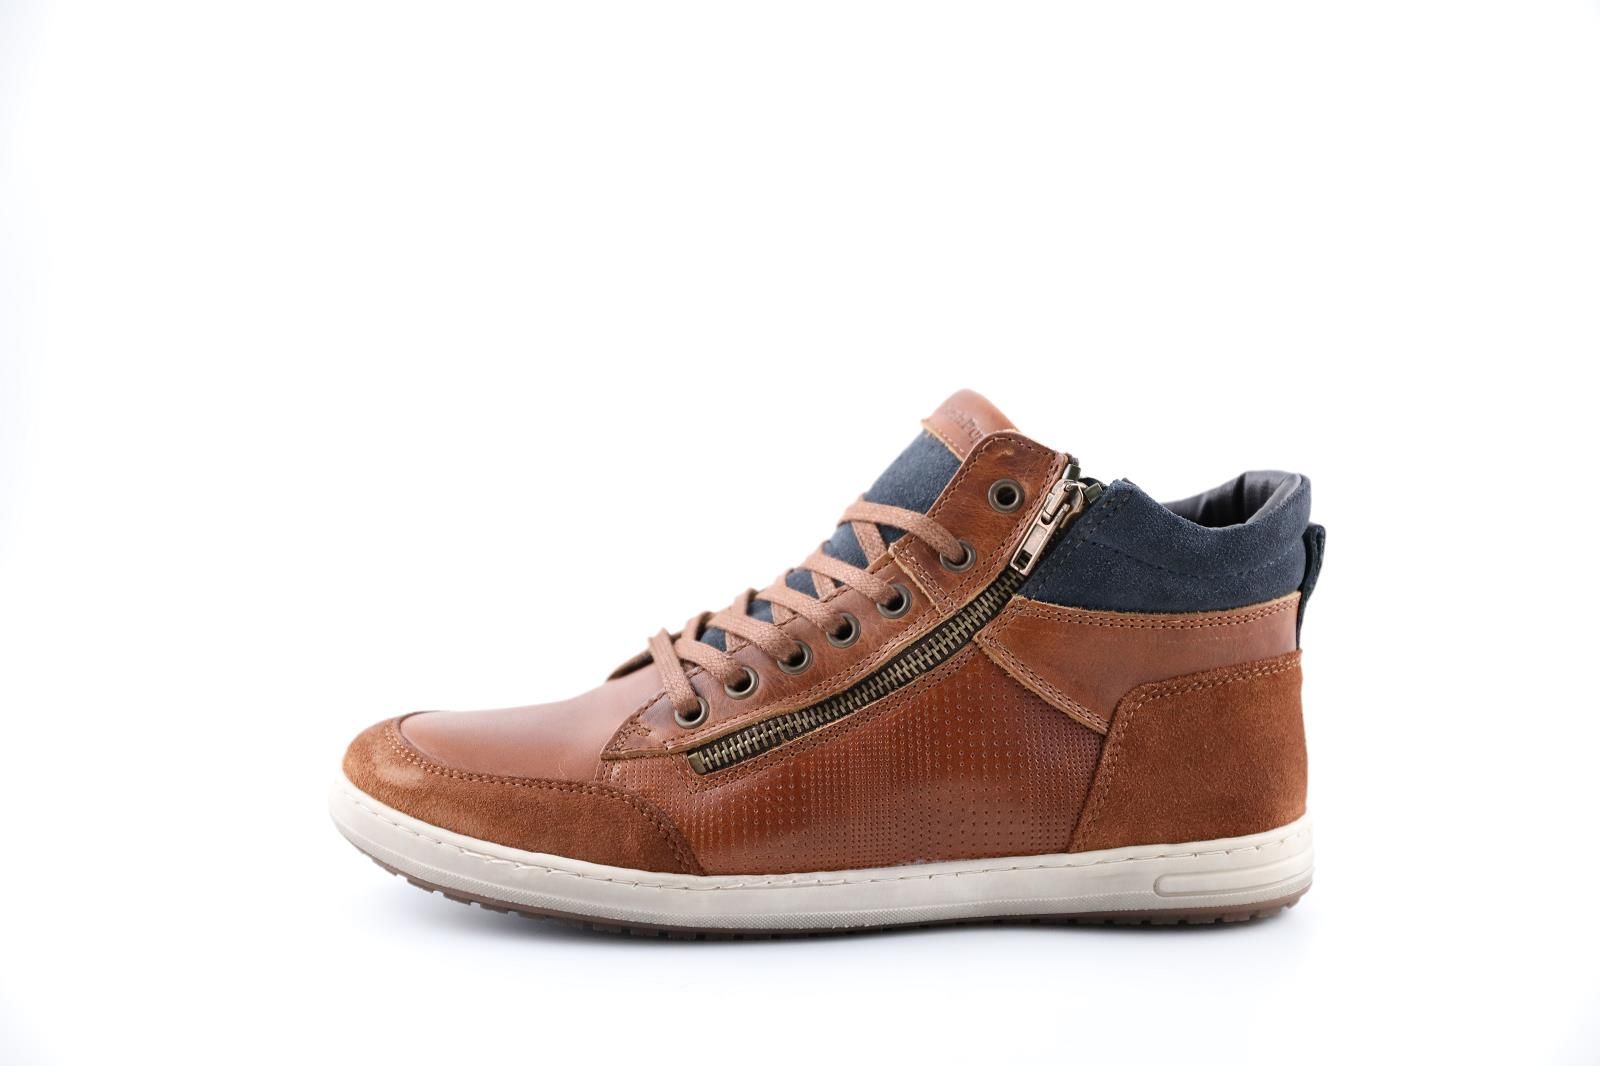 Hush Puppies Chaussures Camel hommes (Watero - WATERO) - Marques à Suivre